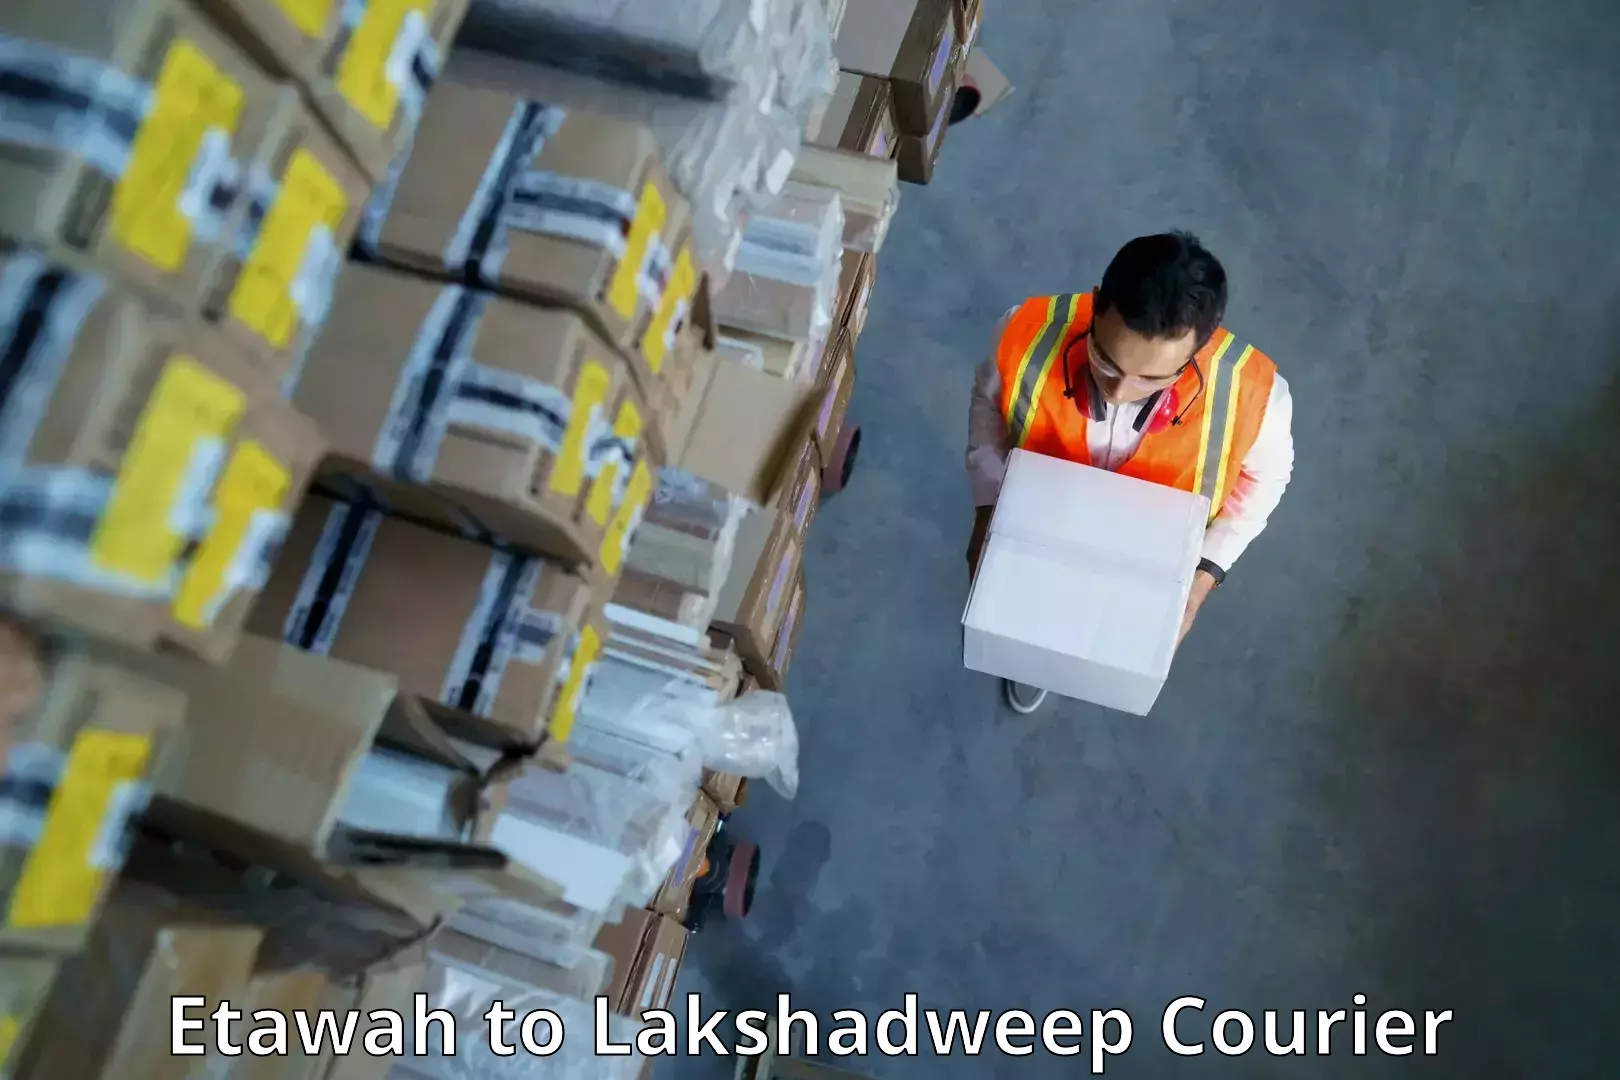 Next-day delivery options Etawah to Lakshadweep